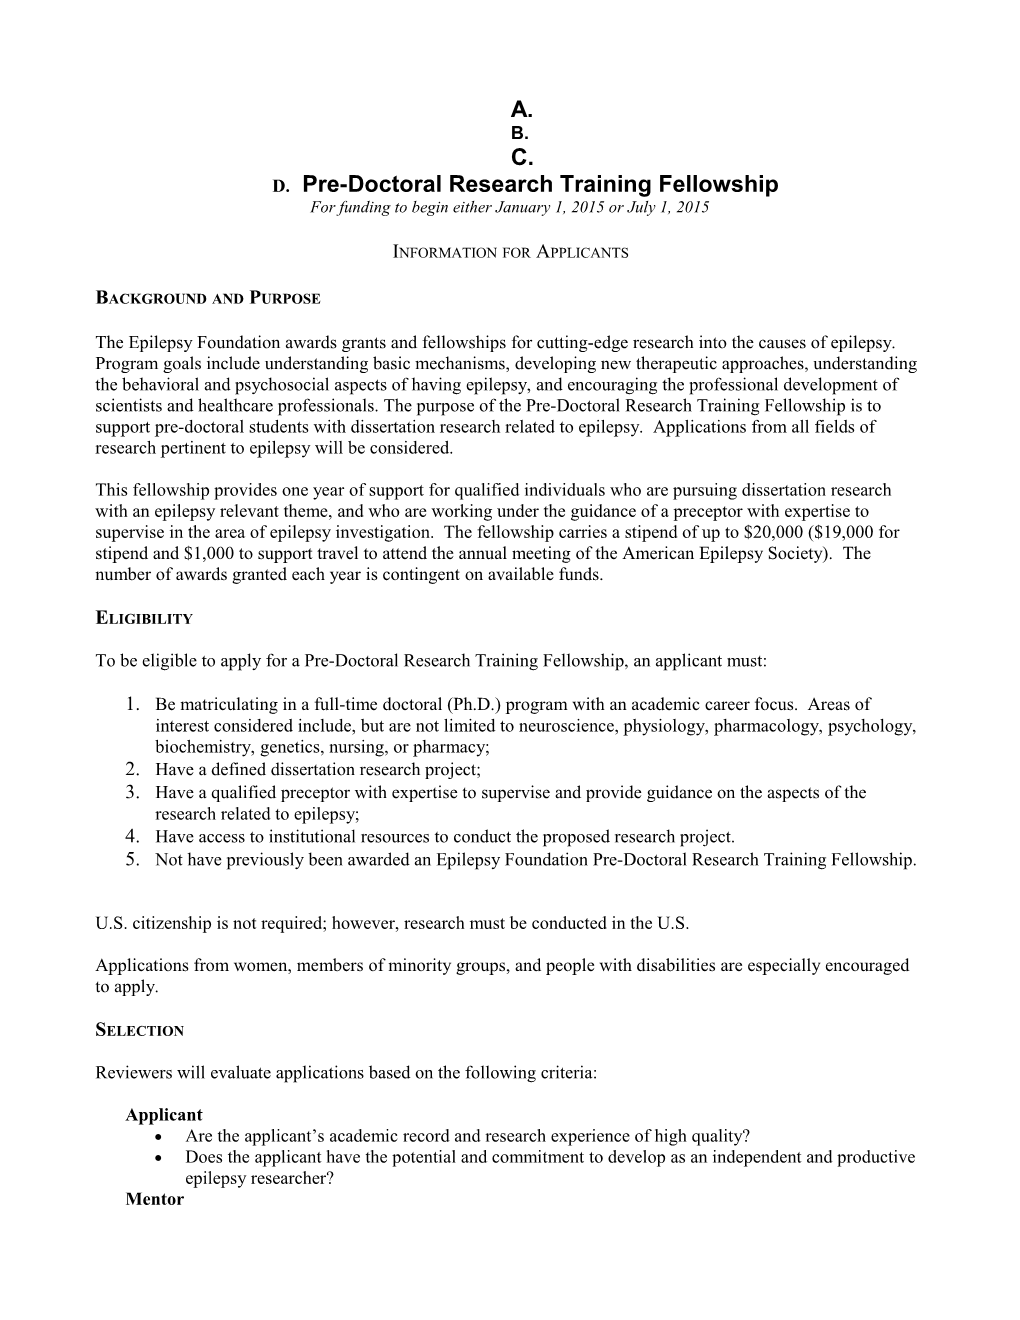 Pre-Doctoral Research Training Fellowship